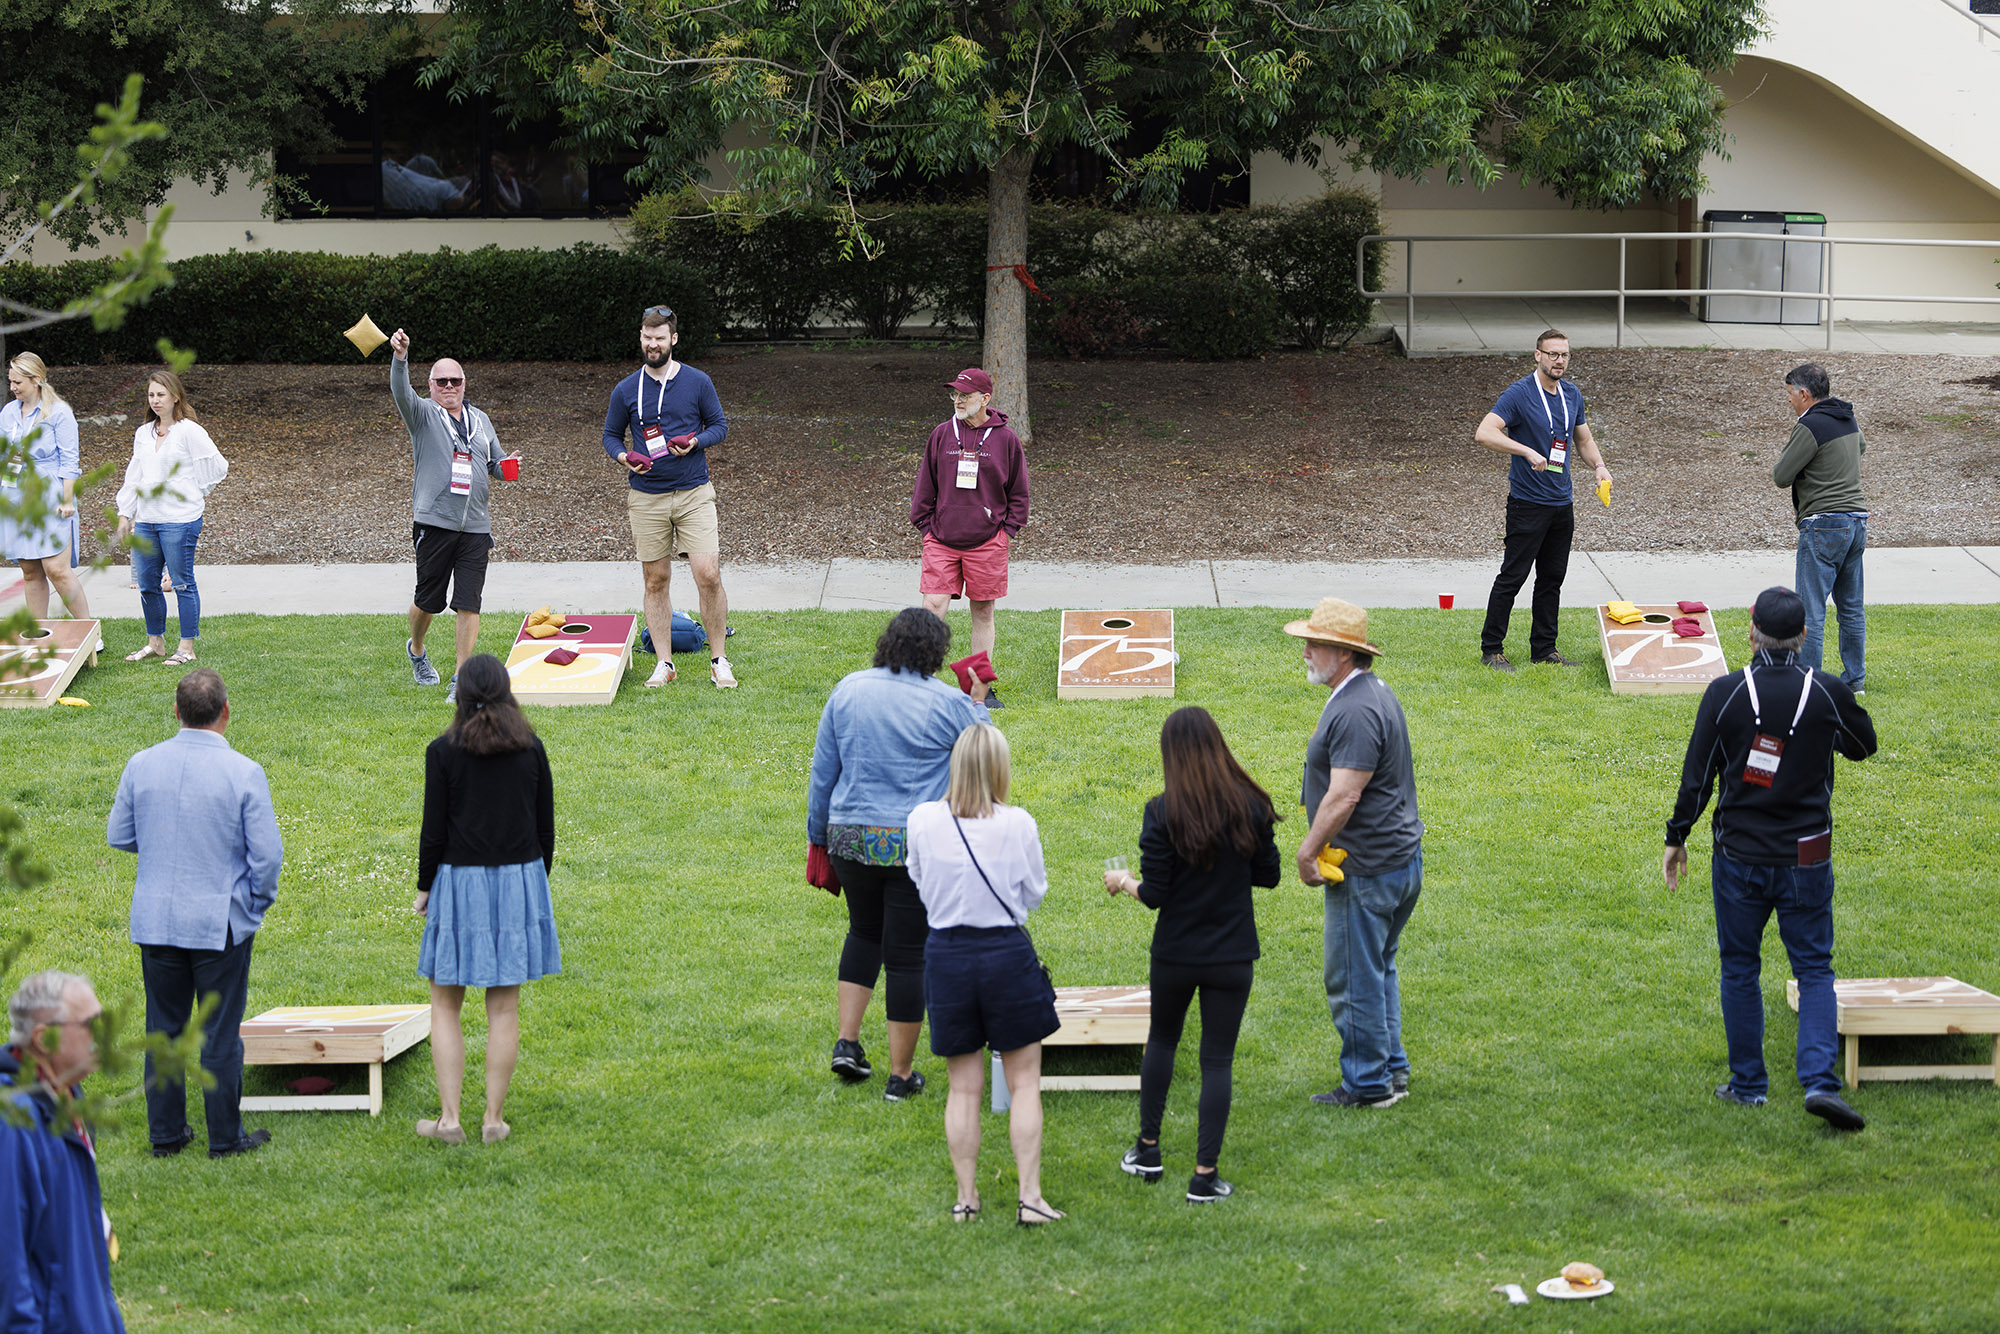 Friends and family of CMC alumni enjoy a cornhole tournament on the lawn during the second day of 2022 Alumni Weekend.